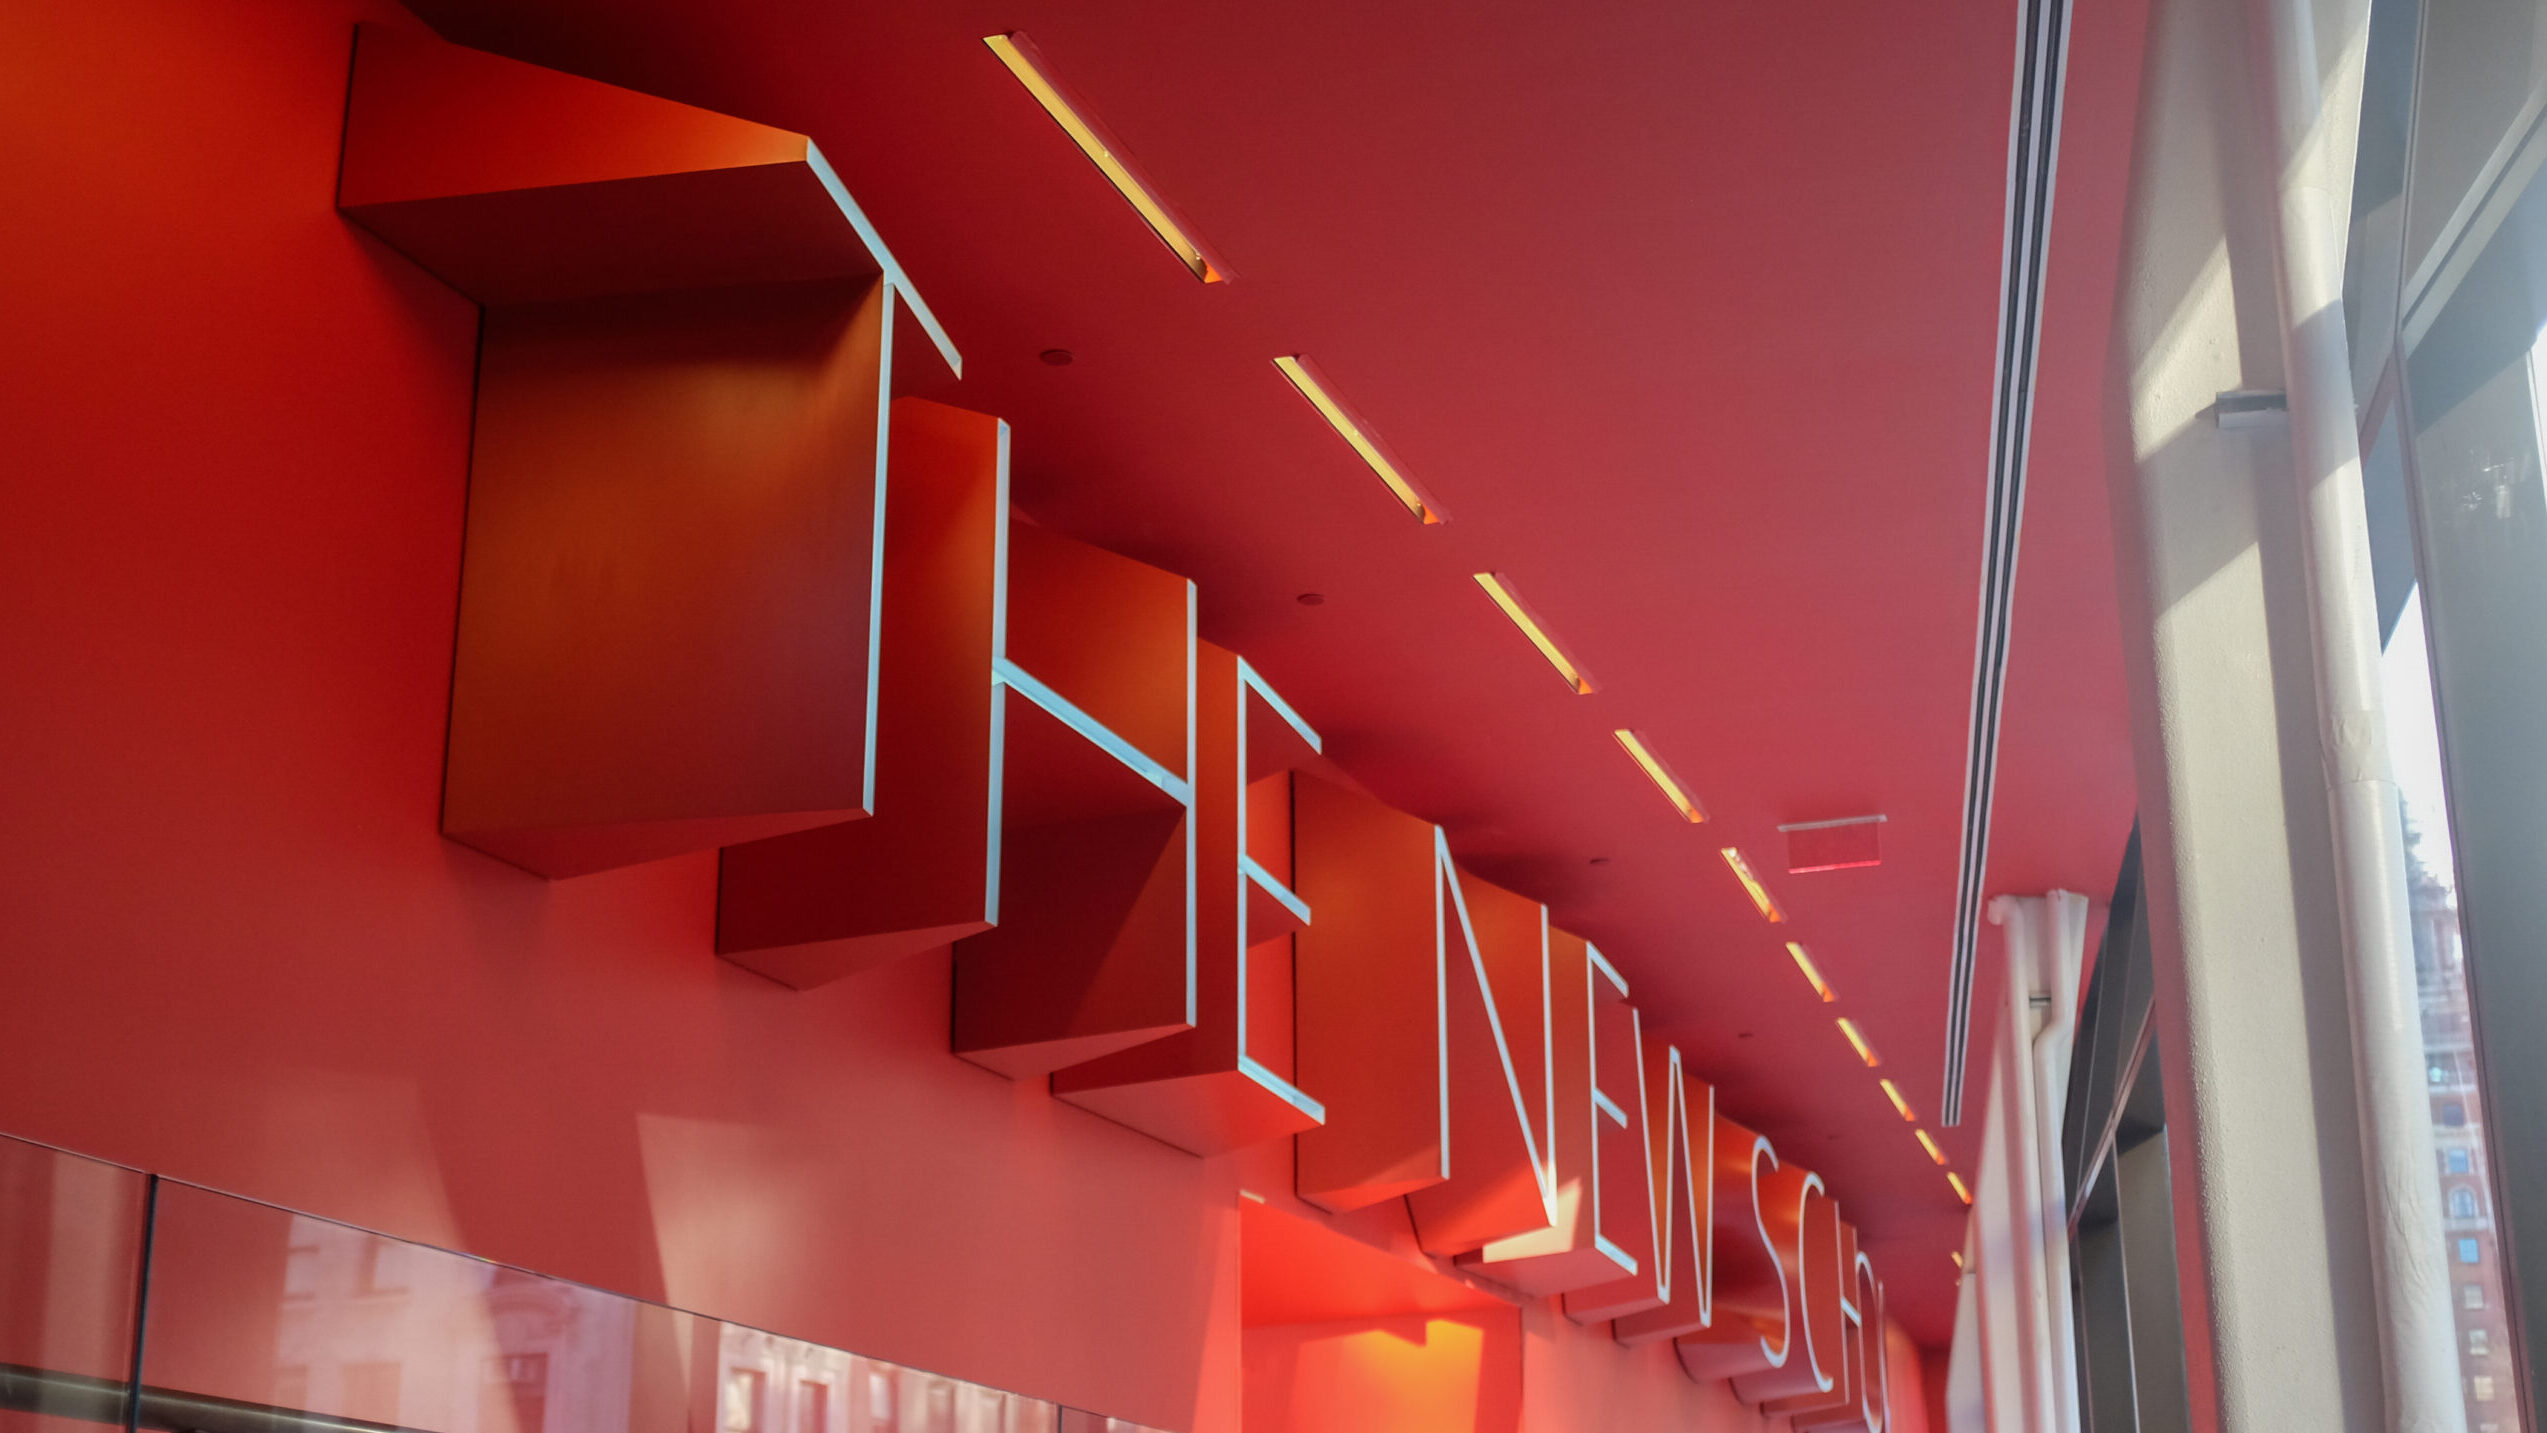 image of "The New School" written in 3D on a red wall in the University Center.